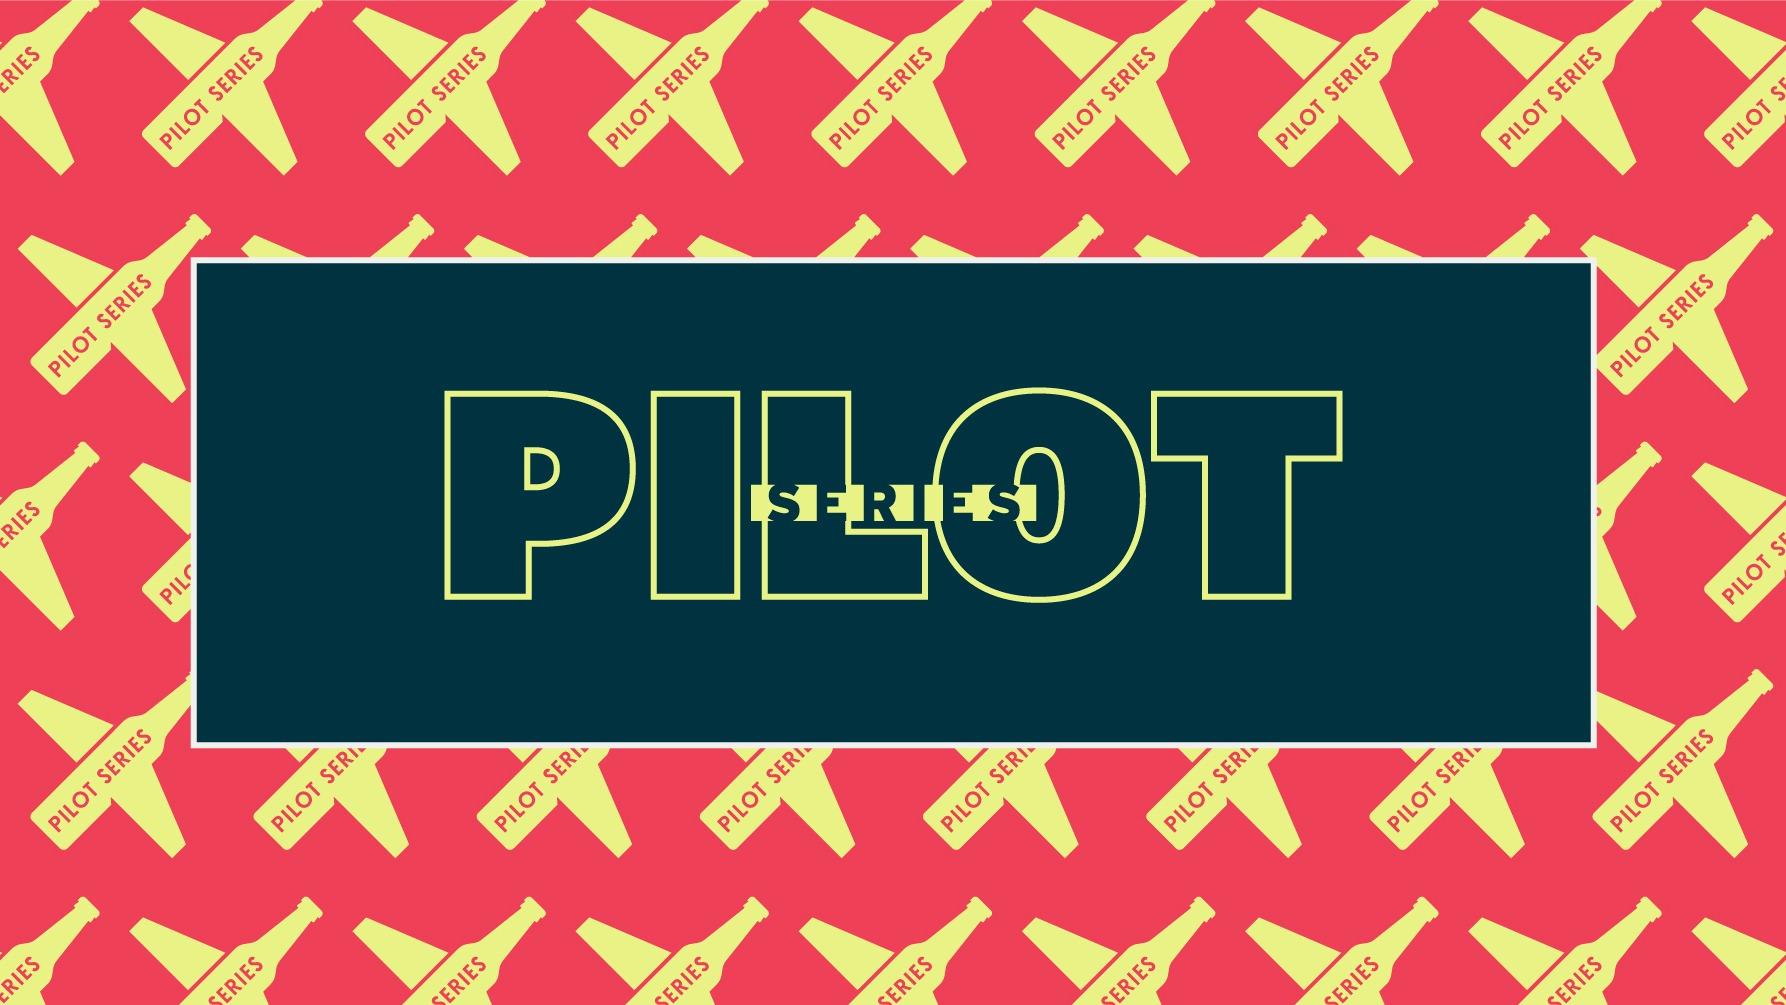 Navy rectangle with the words "PILOT SERIES" within it. The navy rectangle sits on top of a red rectangle with a pattern of beer bottles that look like airplanes.